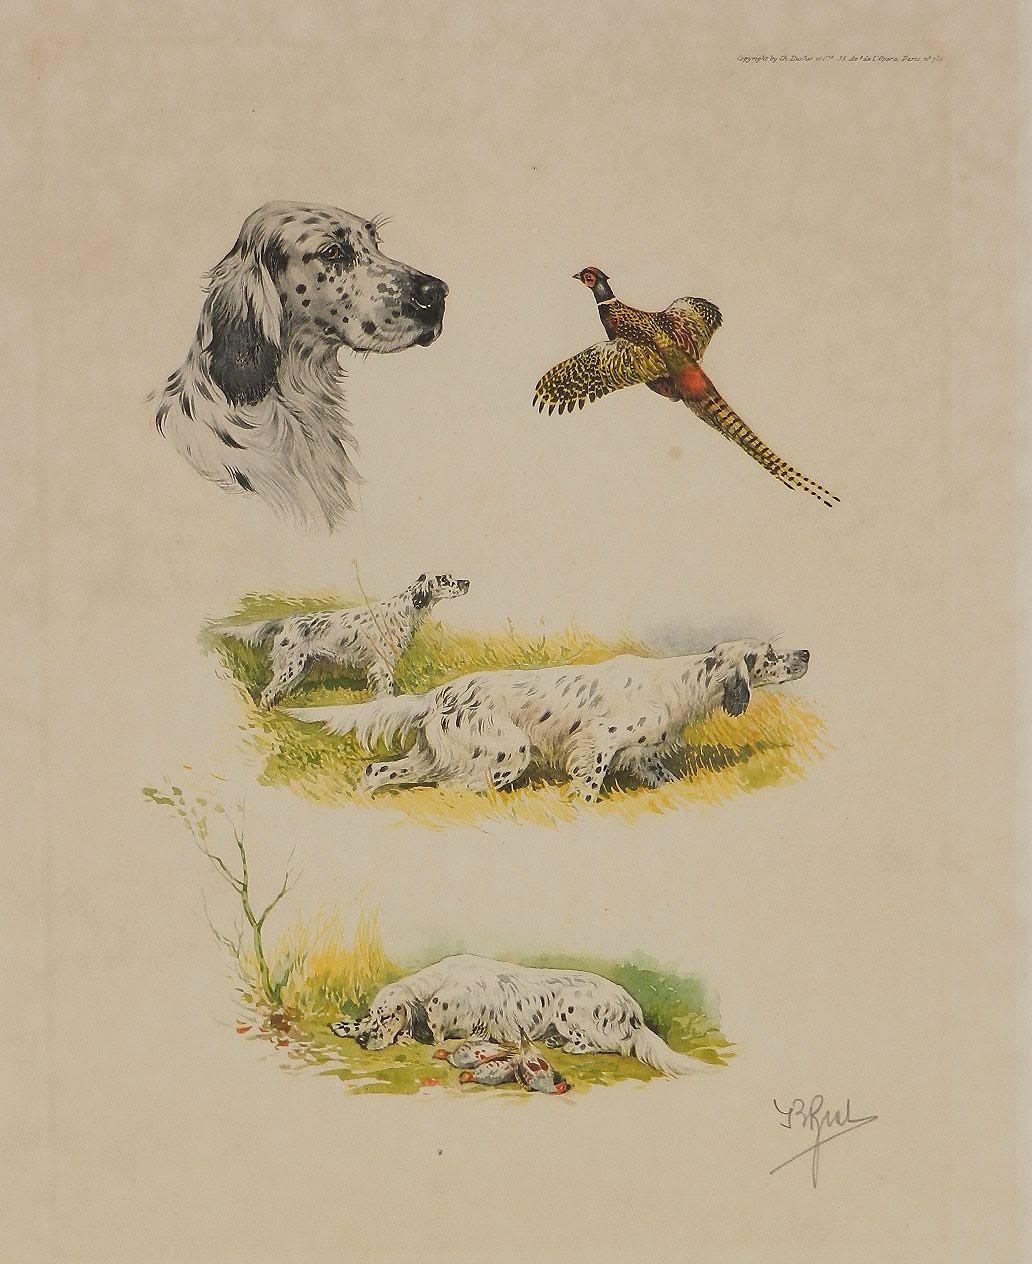 Etching Aquatint of Working Dogs and Pheasant French 
Signed in pencil by artist Boris Riab 1898-1975
contemporary of Leon Danchin
Published by Ch. Ducher Paris
Unframed 
Actual image plate size 32 x 25cms
Old art cartridge paper with general